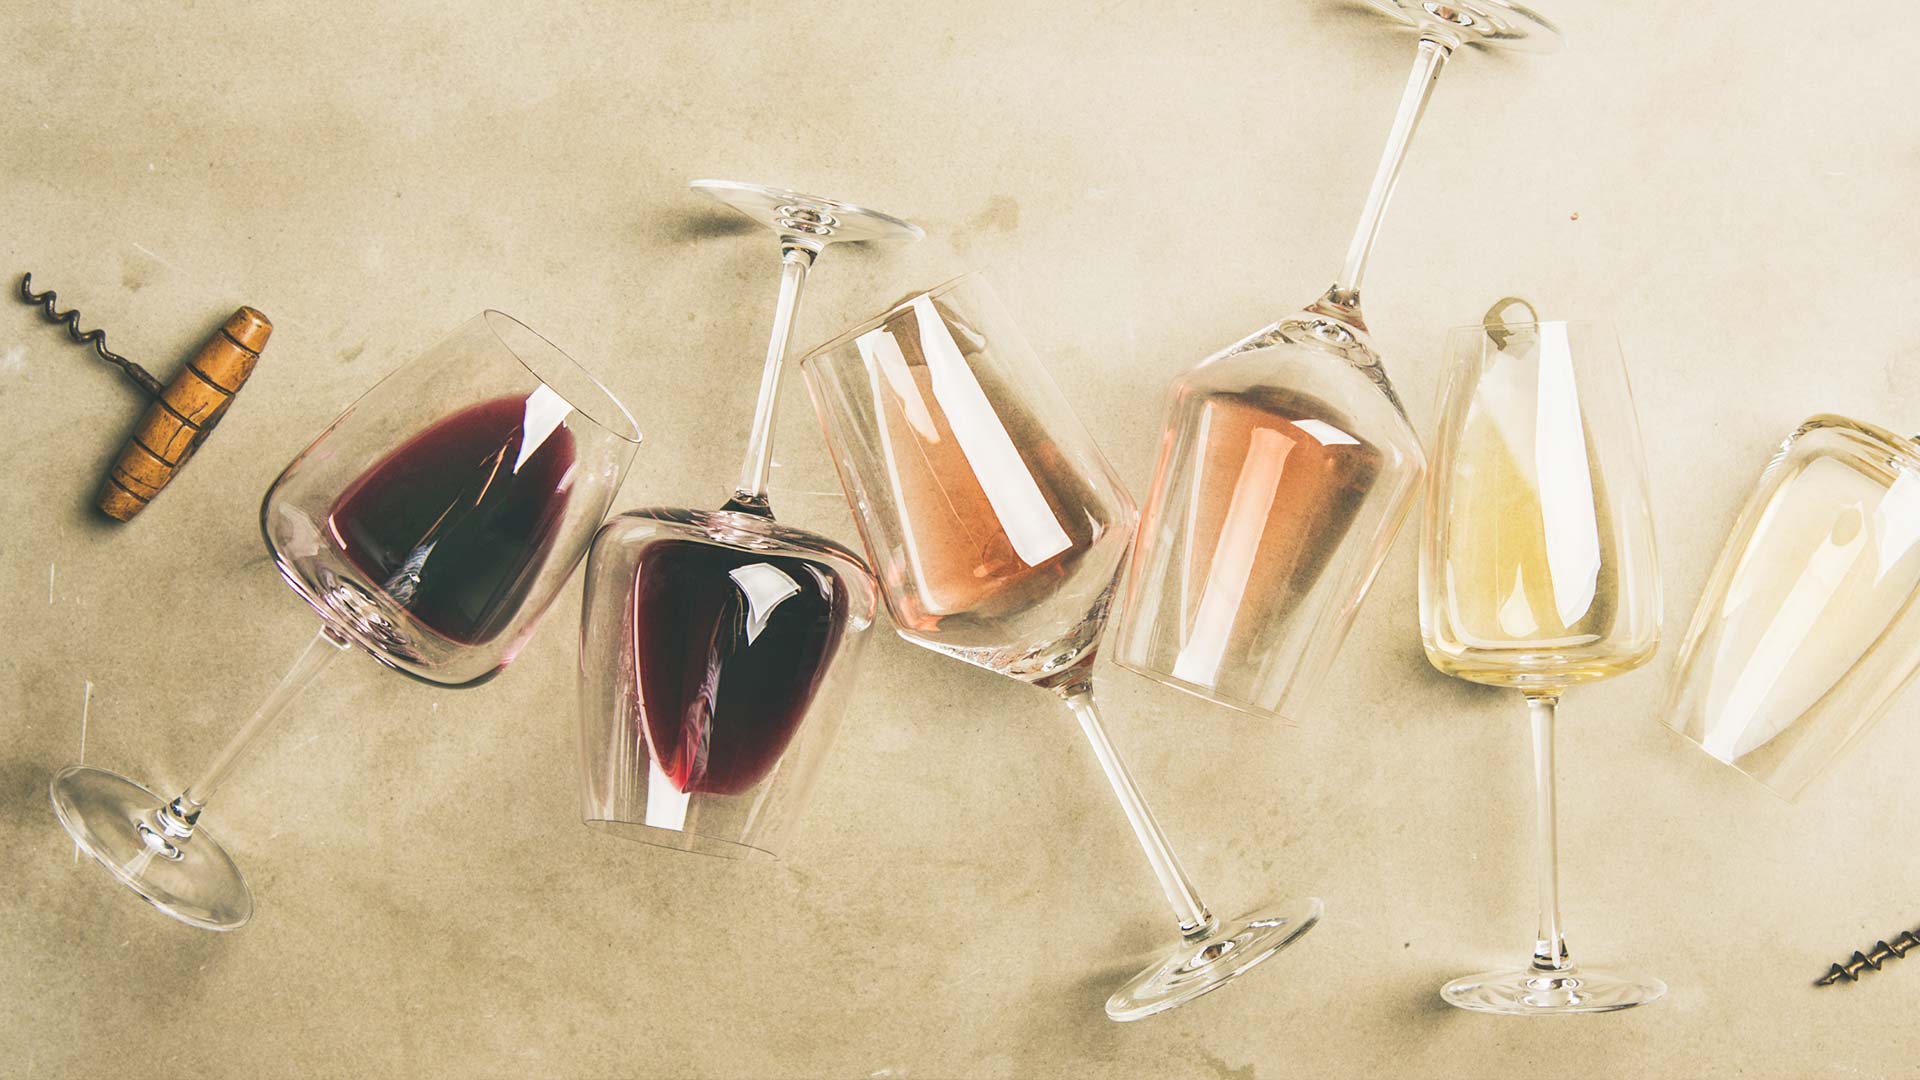 A collection of wine glasses filled with red, white and rosé wine - Champagne